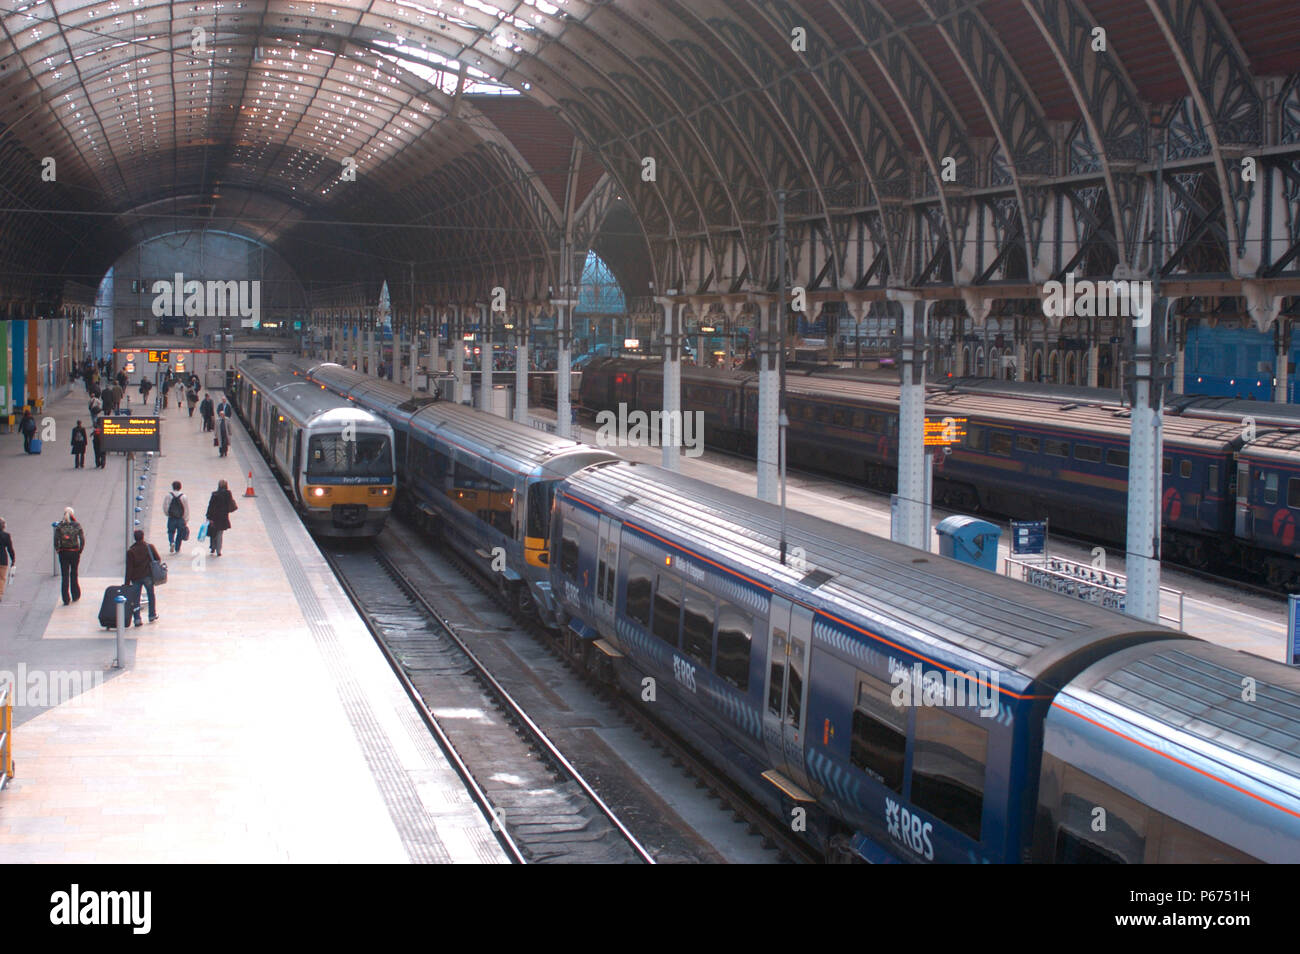 The Great Western Railway. Paddington Station. View from station footbridge looking under trainshed with Great Western link service to left and Heathr Stock Photo